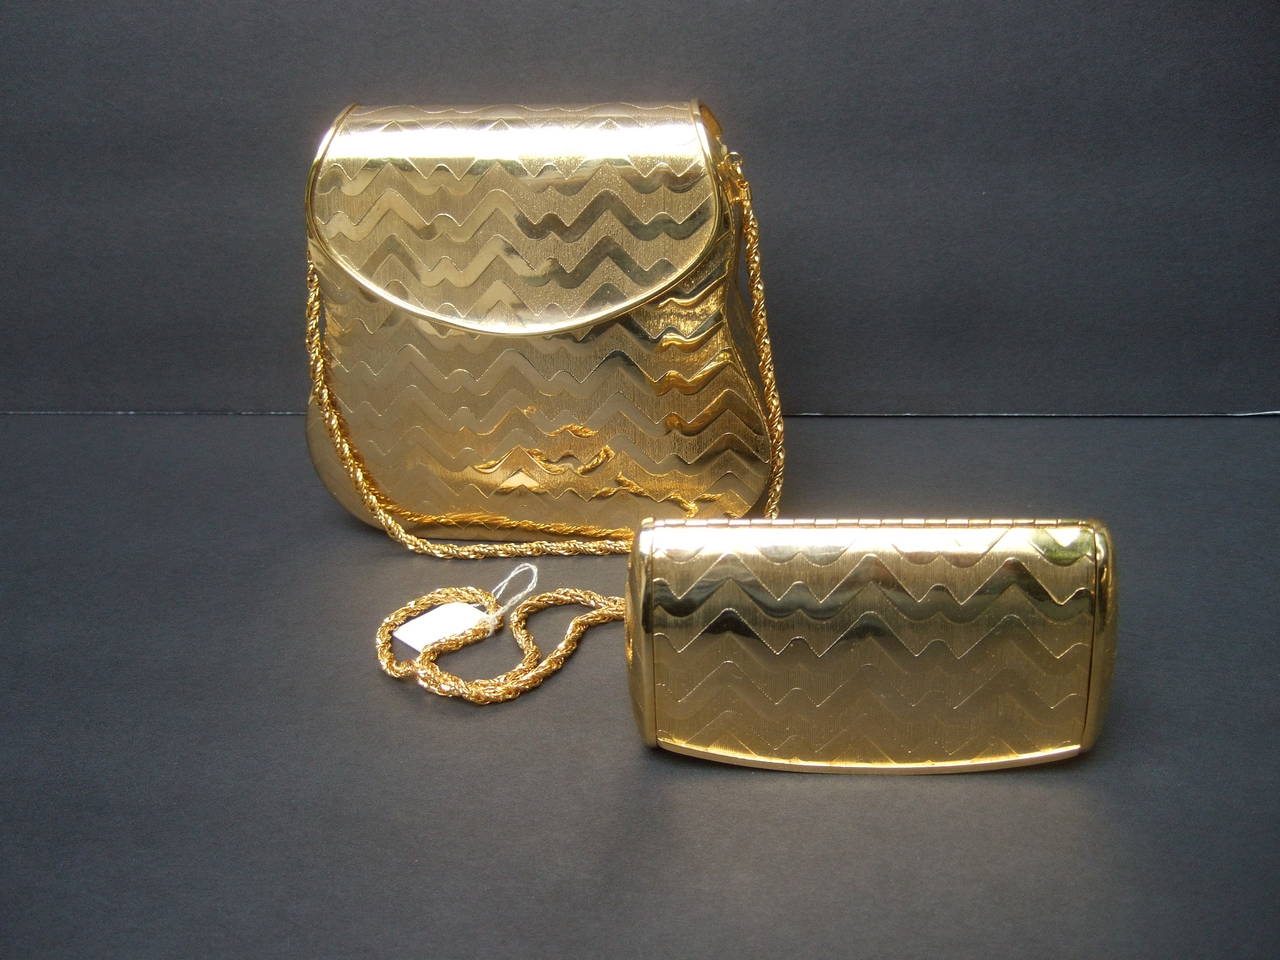 Elegant gilt metal evening bag set Made in Italy c 1970
The Italian evening bag is designed with luminous 
gilt metal in a chevron pattern that hangs from a
braided gilt metal stationary chain strap 

The metal exterior is designed with smooth